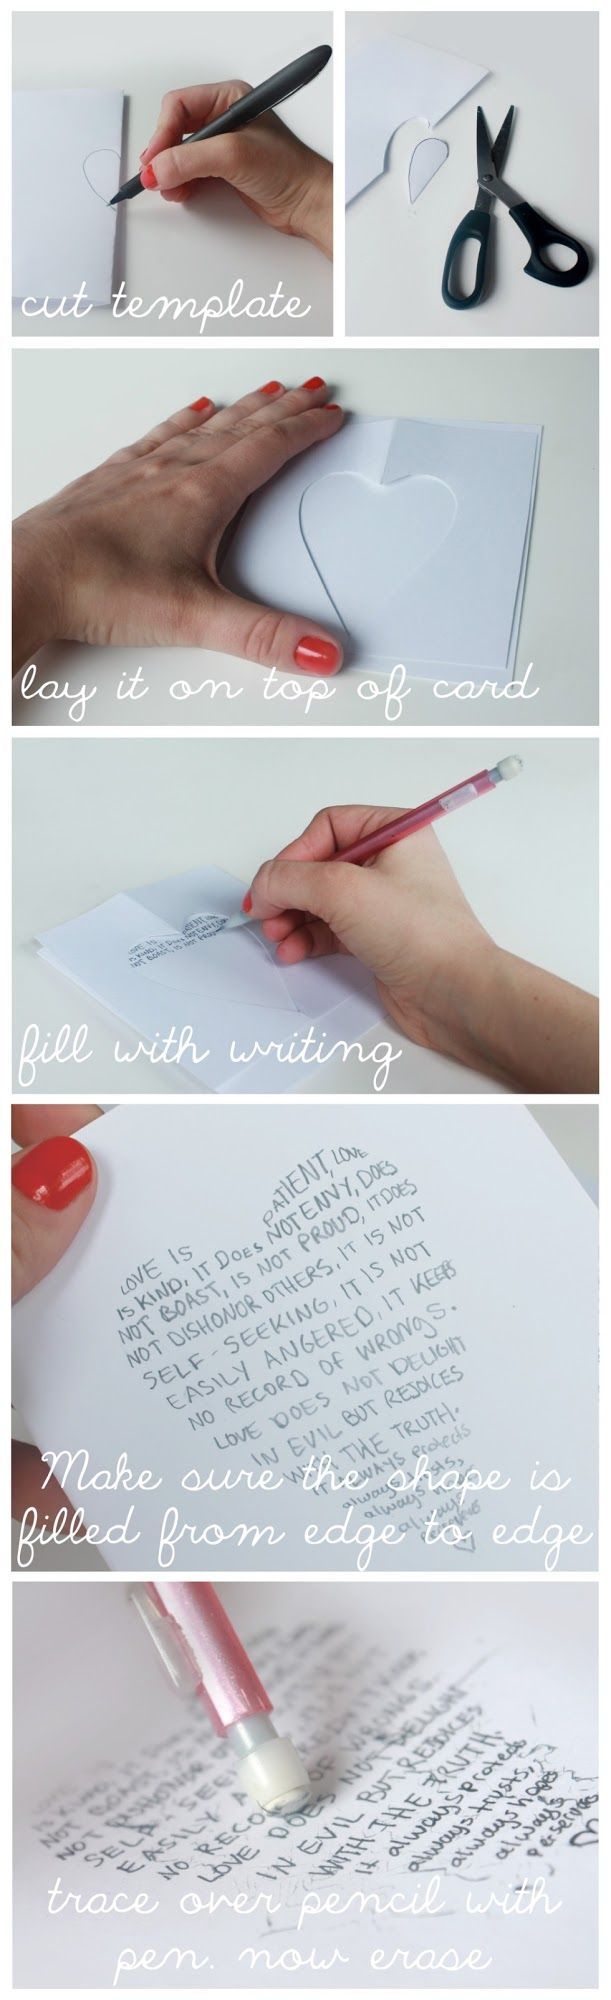 We Lived Happily Ever After: Use Cookie Cutters to “Write Shapes” on Greeting Cards!